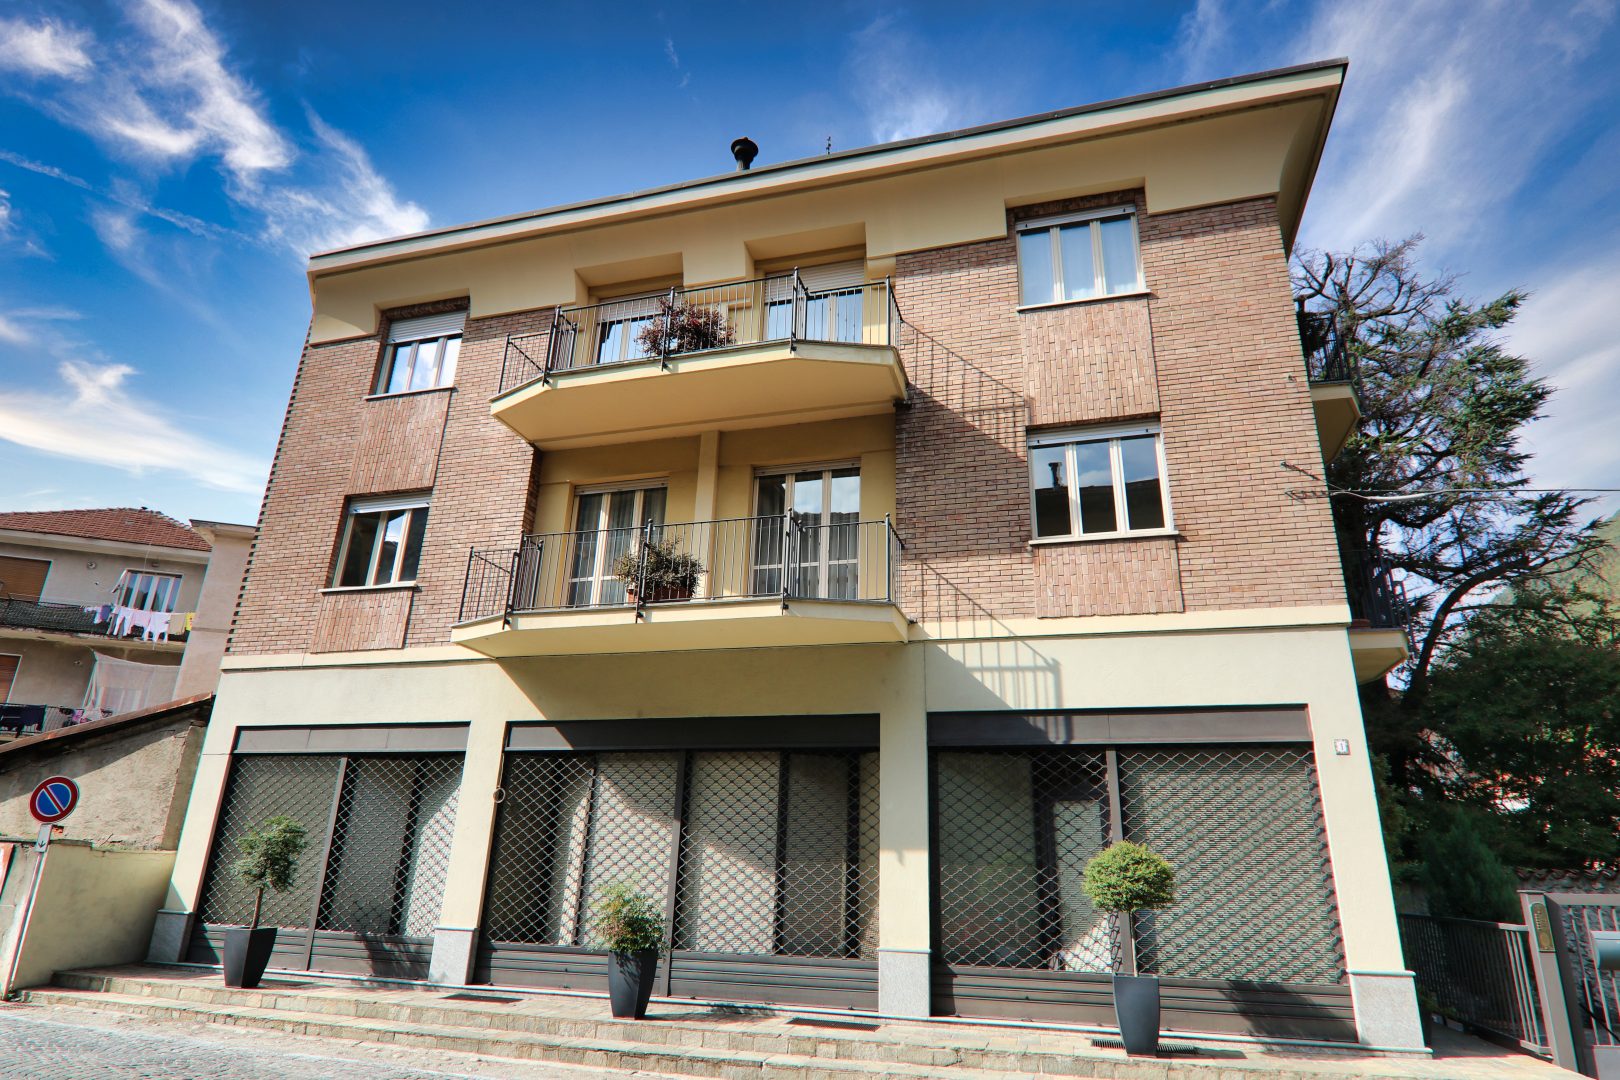 For sale palace in city Pont-Canavese Piemonte